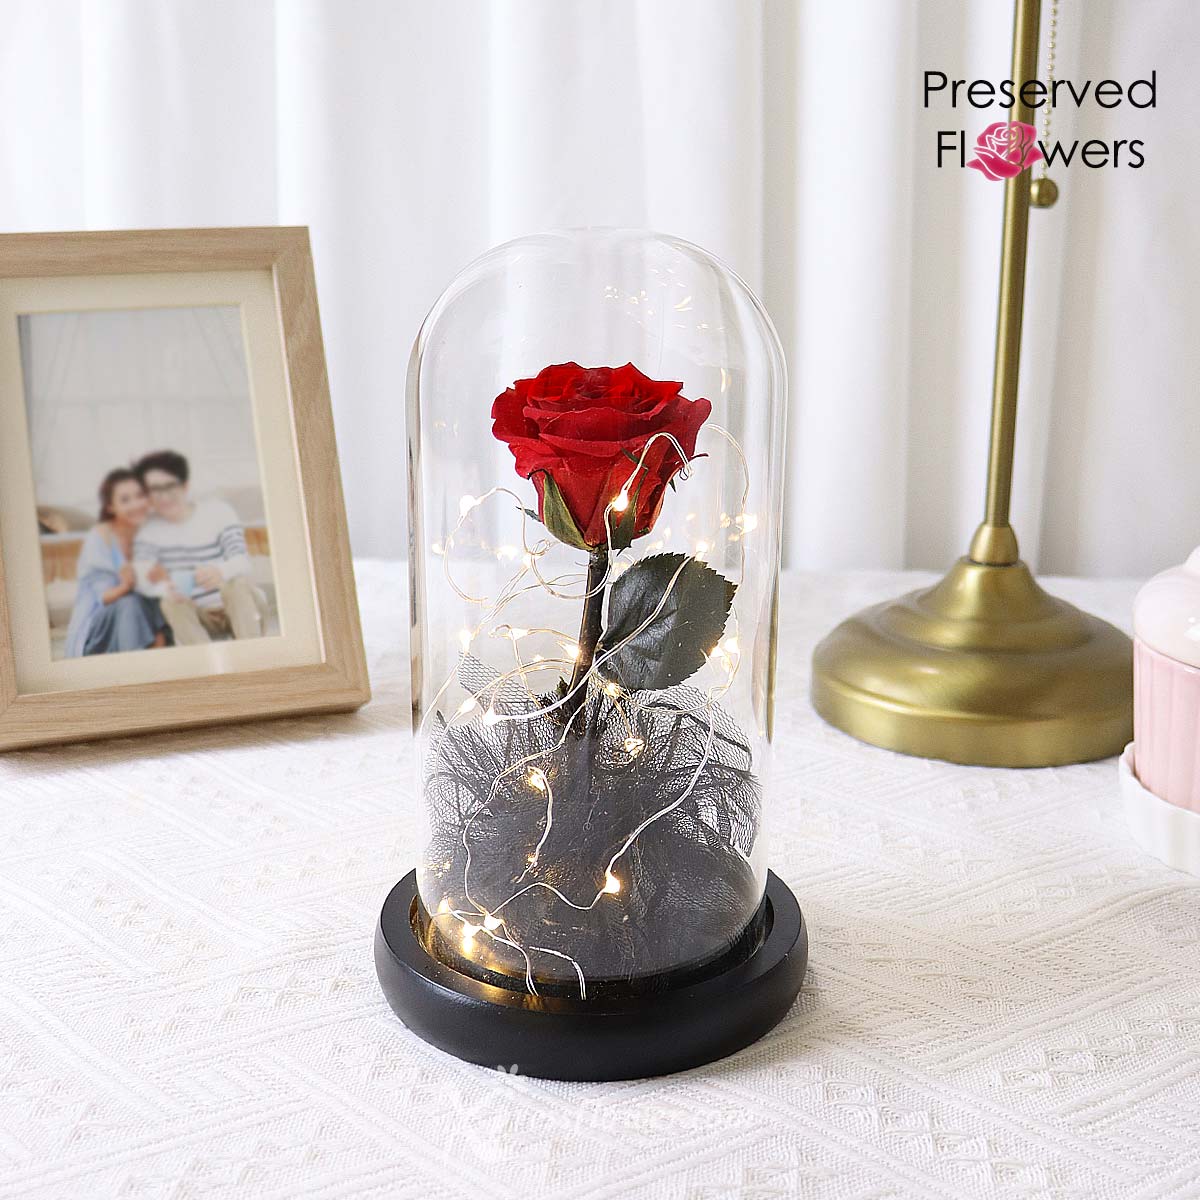 PR2302 Glamourous Rose (Preserved Flowers) 3a